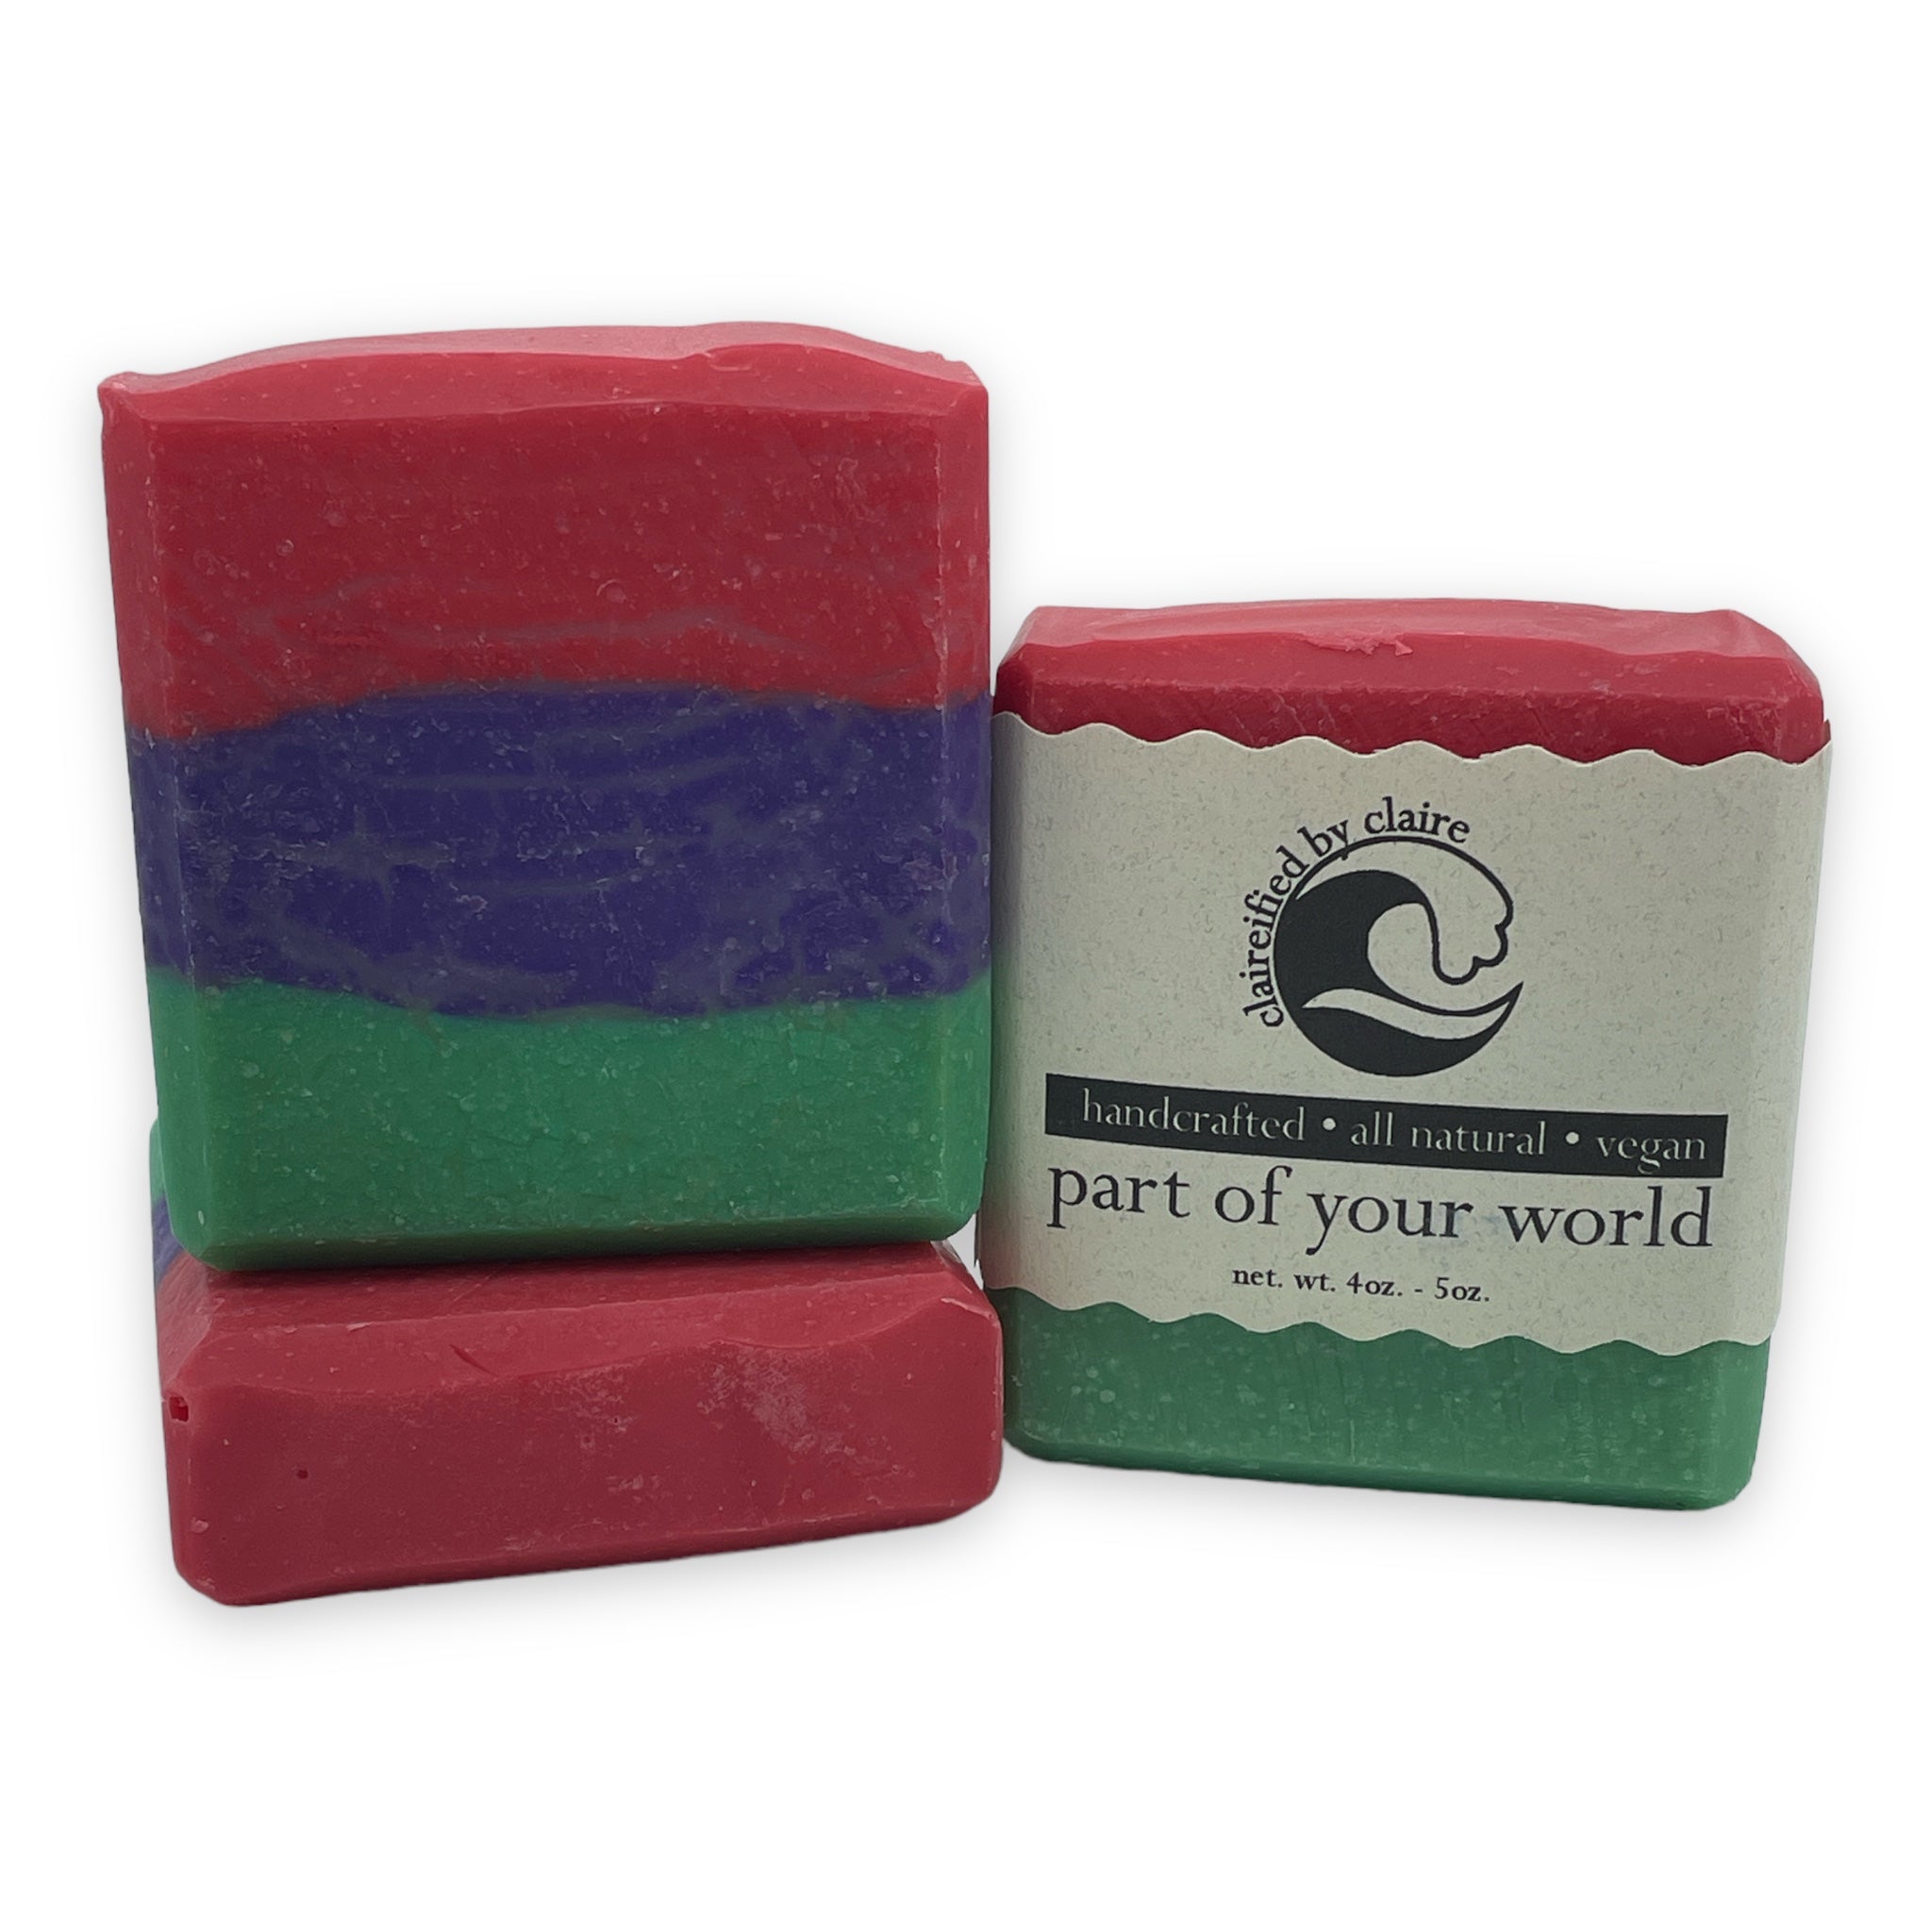 Part Of Your World handmade soap inspired by the Ariel, The Little Mermaid - 0